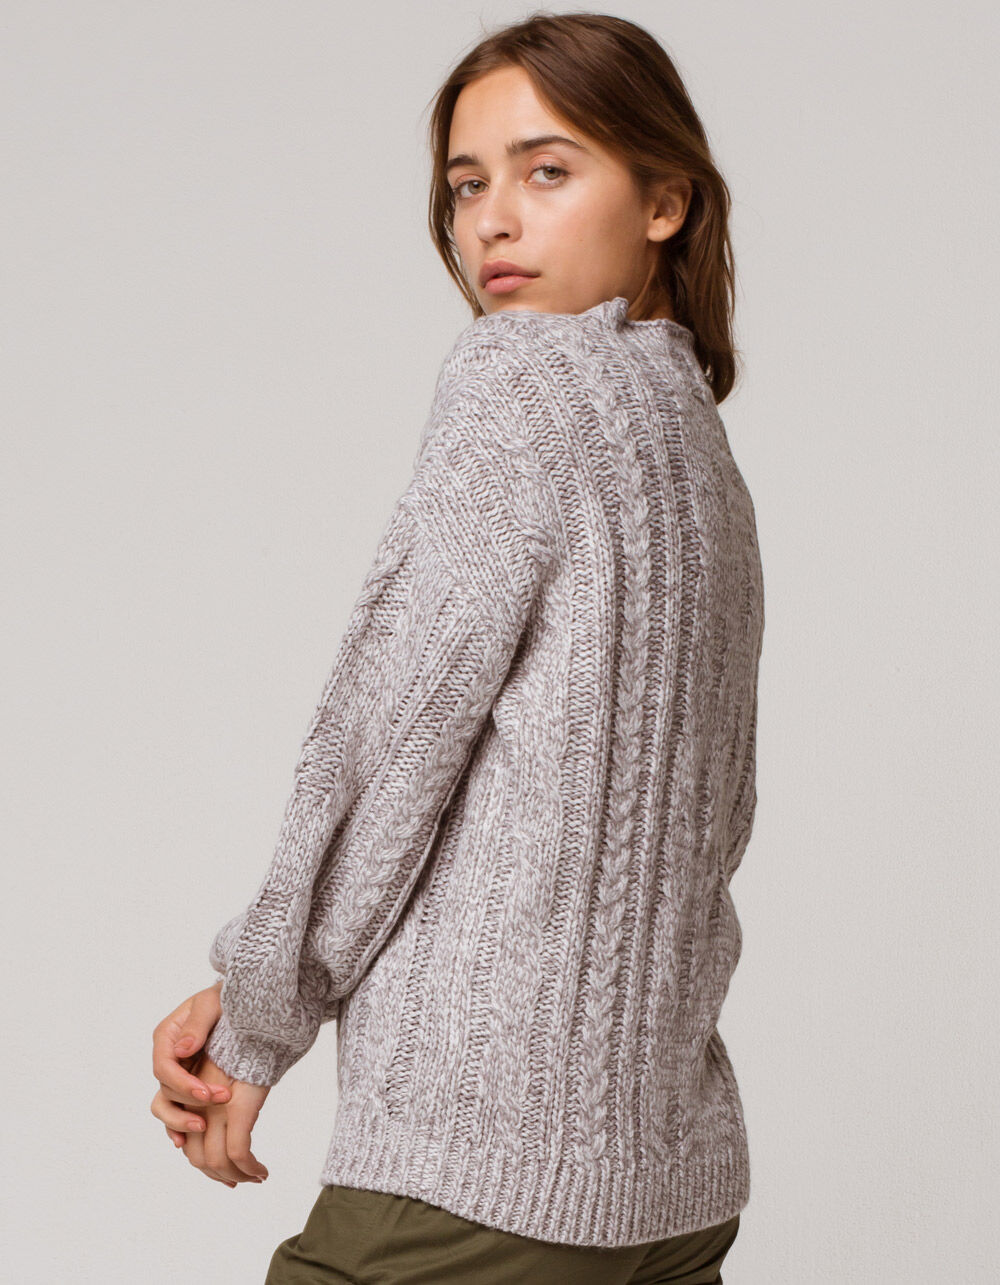 RUSTY Folklore Chunky Womens Sweater - LIGHT GREY | Tillys